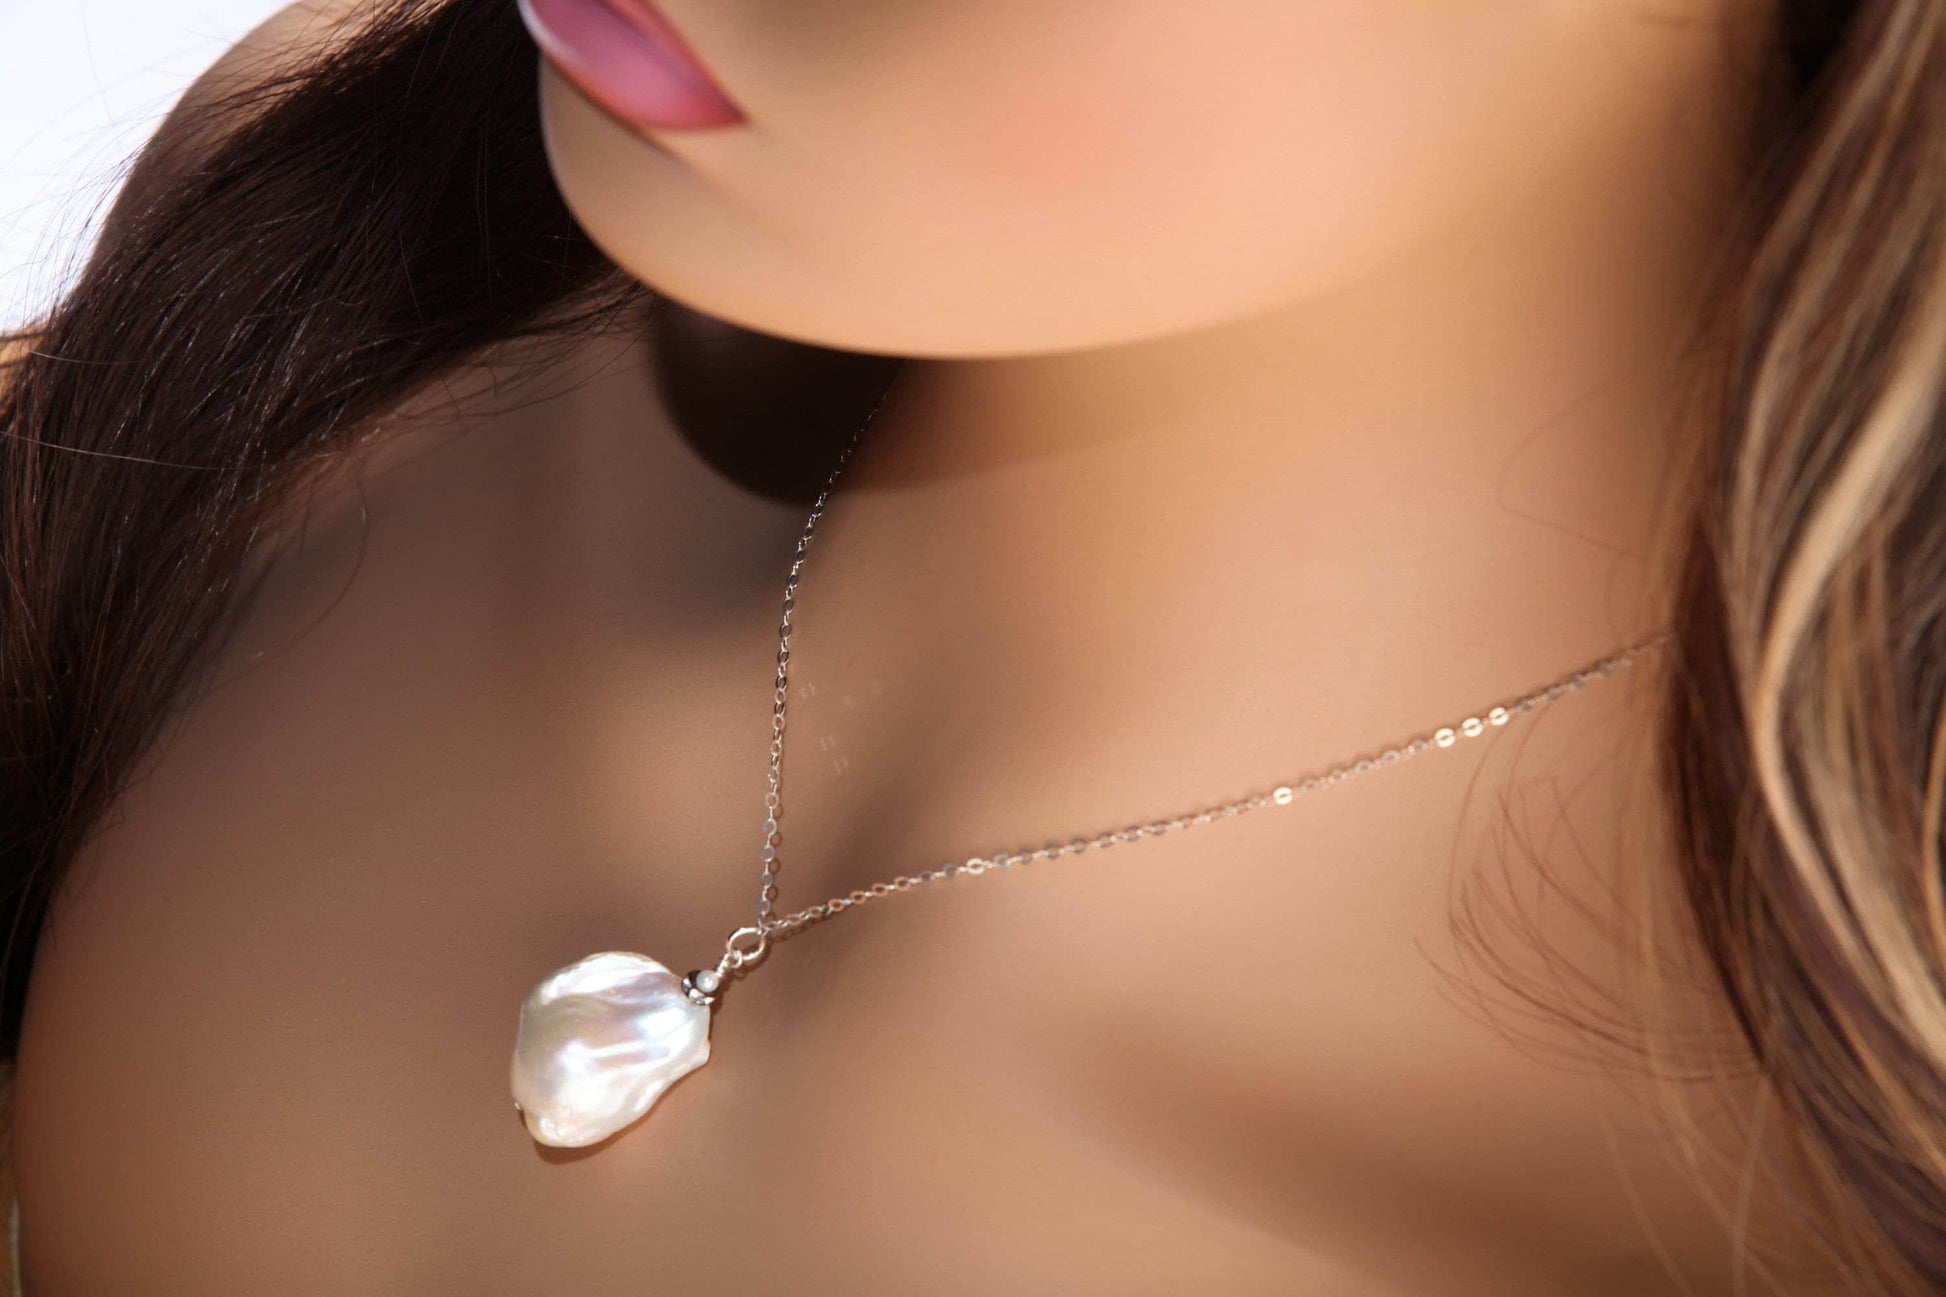 Genuine Freshwater Baroque Pearl with 925 Italian Sterling Silver Necklace